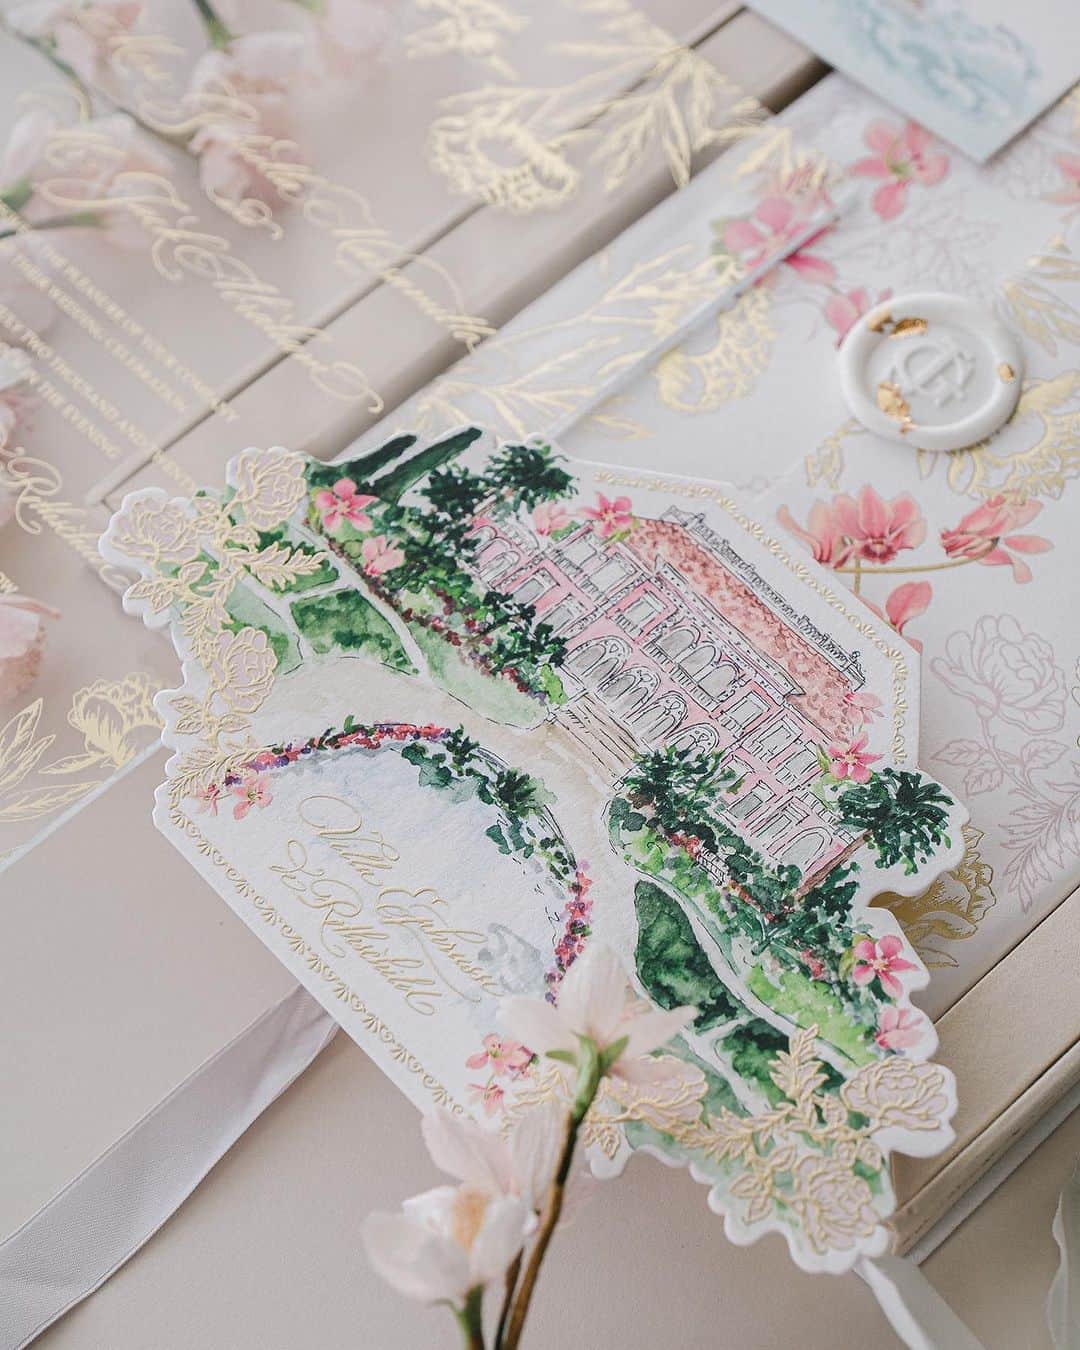 Veronica Halimのインスタグラム：「A recent invitation suite designed for J&G's Cote d'Azur wedding at one of my most favorite venues, Villa Ephrussi de Rothschild. Presented in a beautifully crafted velvet box, this suite was inspired by the breathtaking garden, capturing the essence of this picturesque haven. It blends delicate floral motifs and soft hues to evoke a sense of romance and magic. —  #frenchrivierawedding #cotedazur #southoffrancewedding #villaephrussiderothschild #destinationwedding #truffypi  #カリグラフィースタイリング  #weddinginvitation #weddingstationery  #weddingcalligraphy  #paperlovers #ウェディング #ウェディングアイテム #カリグラファ #veronicahalim #スタイリング #prettypapers #weddingsuite」